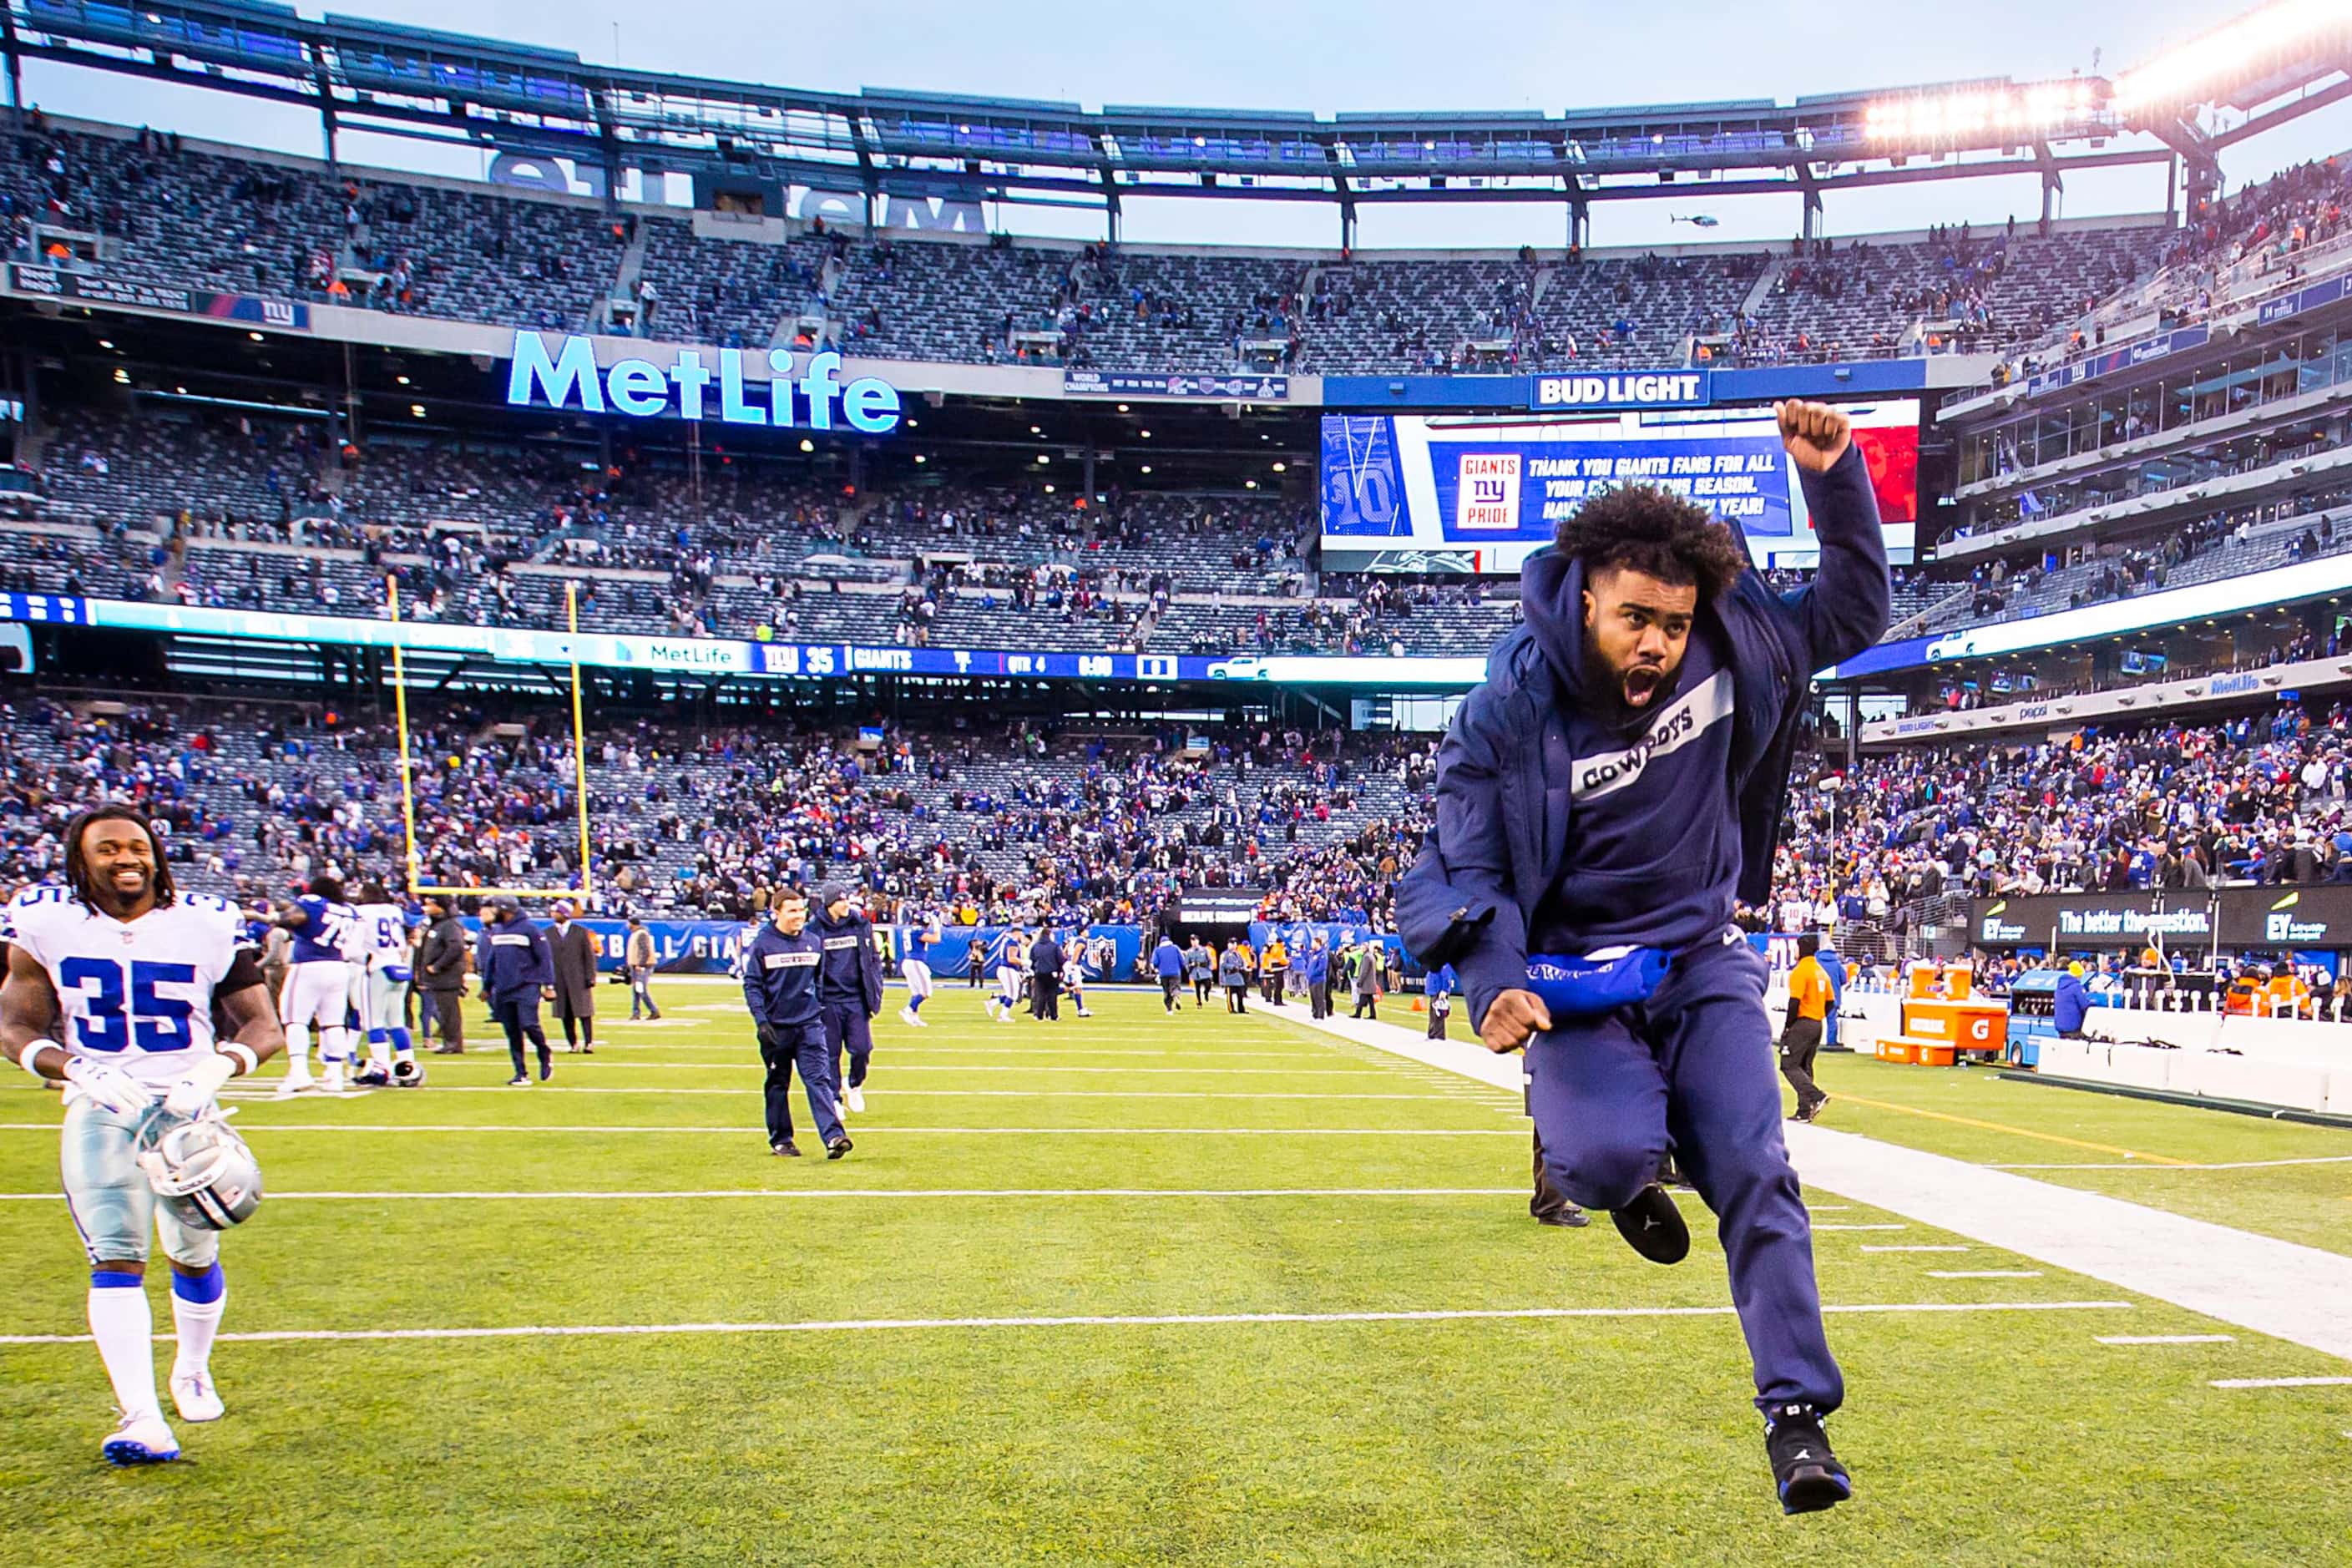 Dallas Cowboys running back Ezekiel Elliott, who was inactive for the game, celebrates as he...